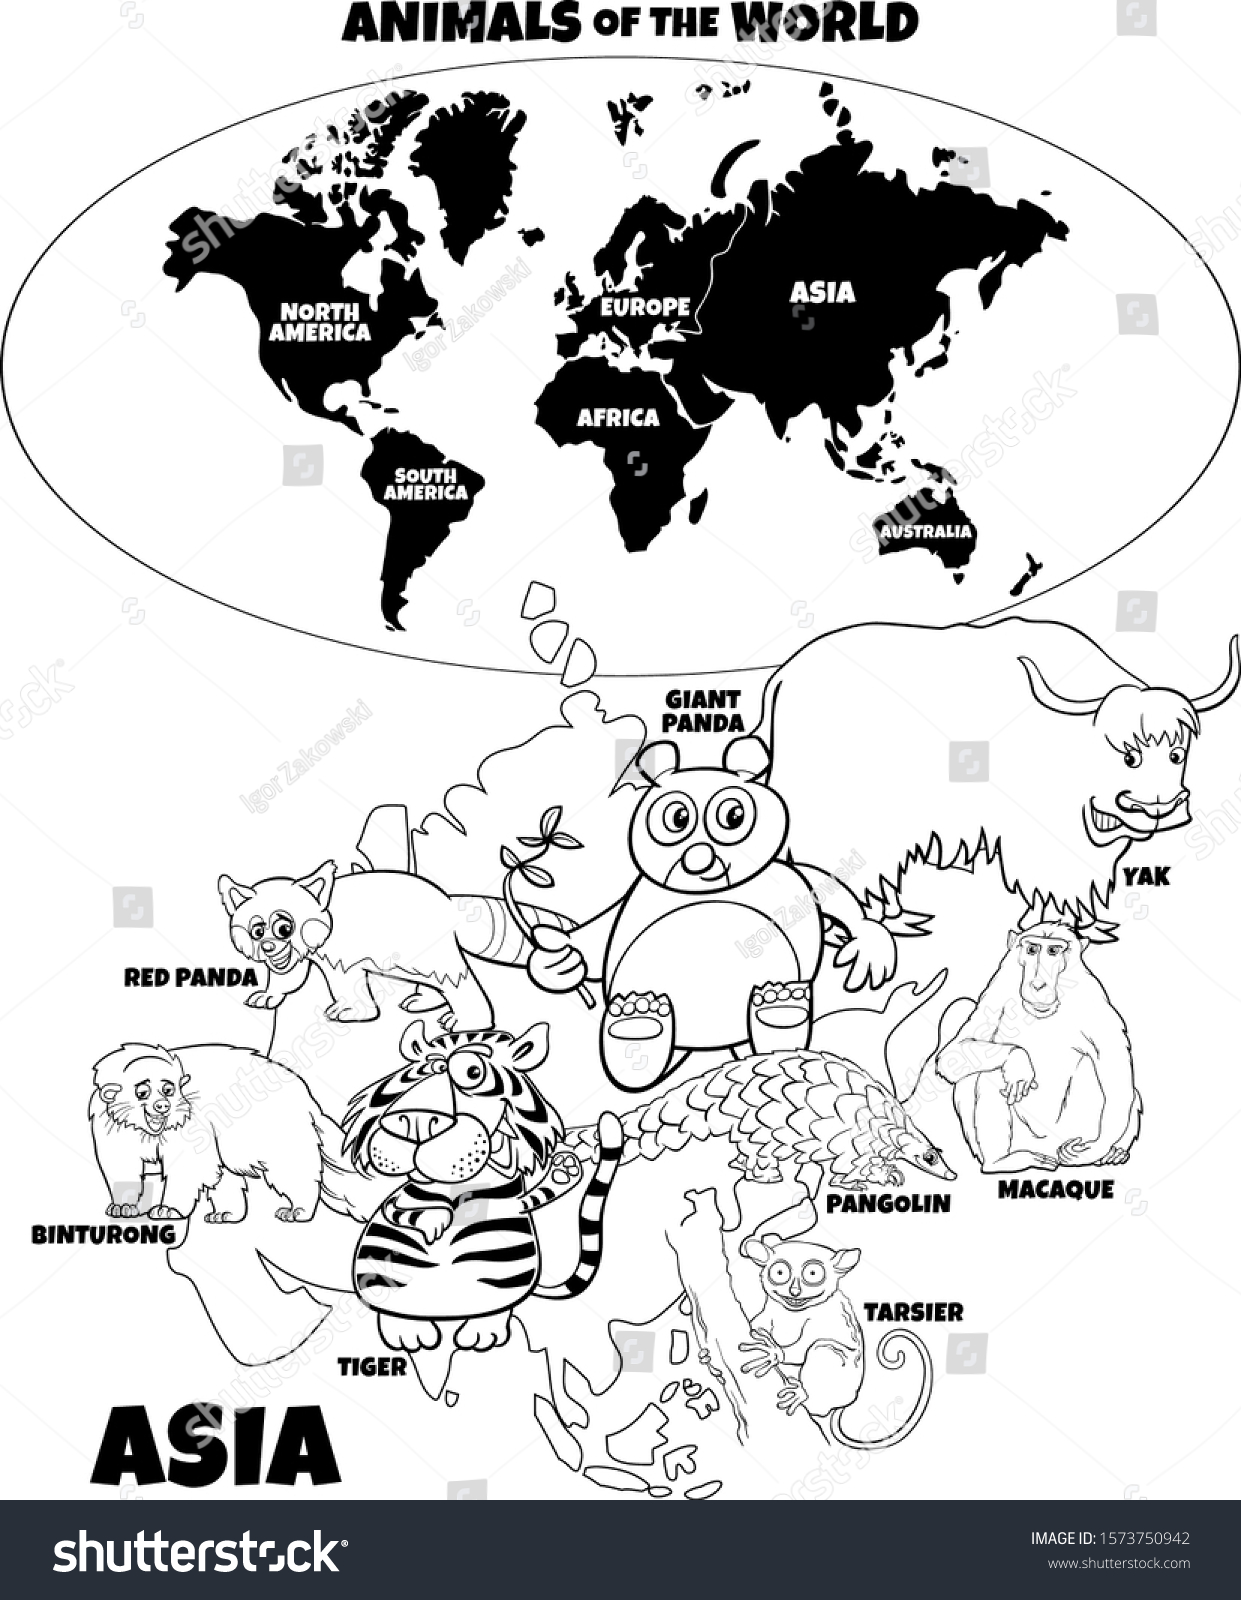 SVG of Black and White Educational Cartoon Illustration of Asian Animals and World Map with Continents Coloring Book Page svg